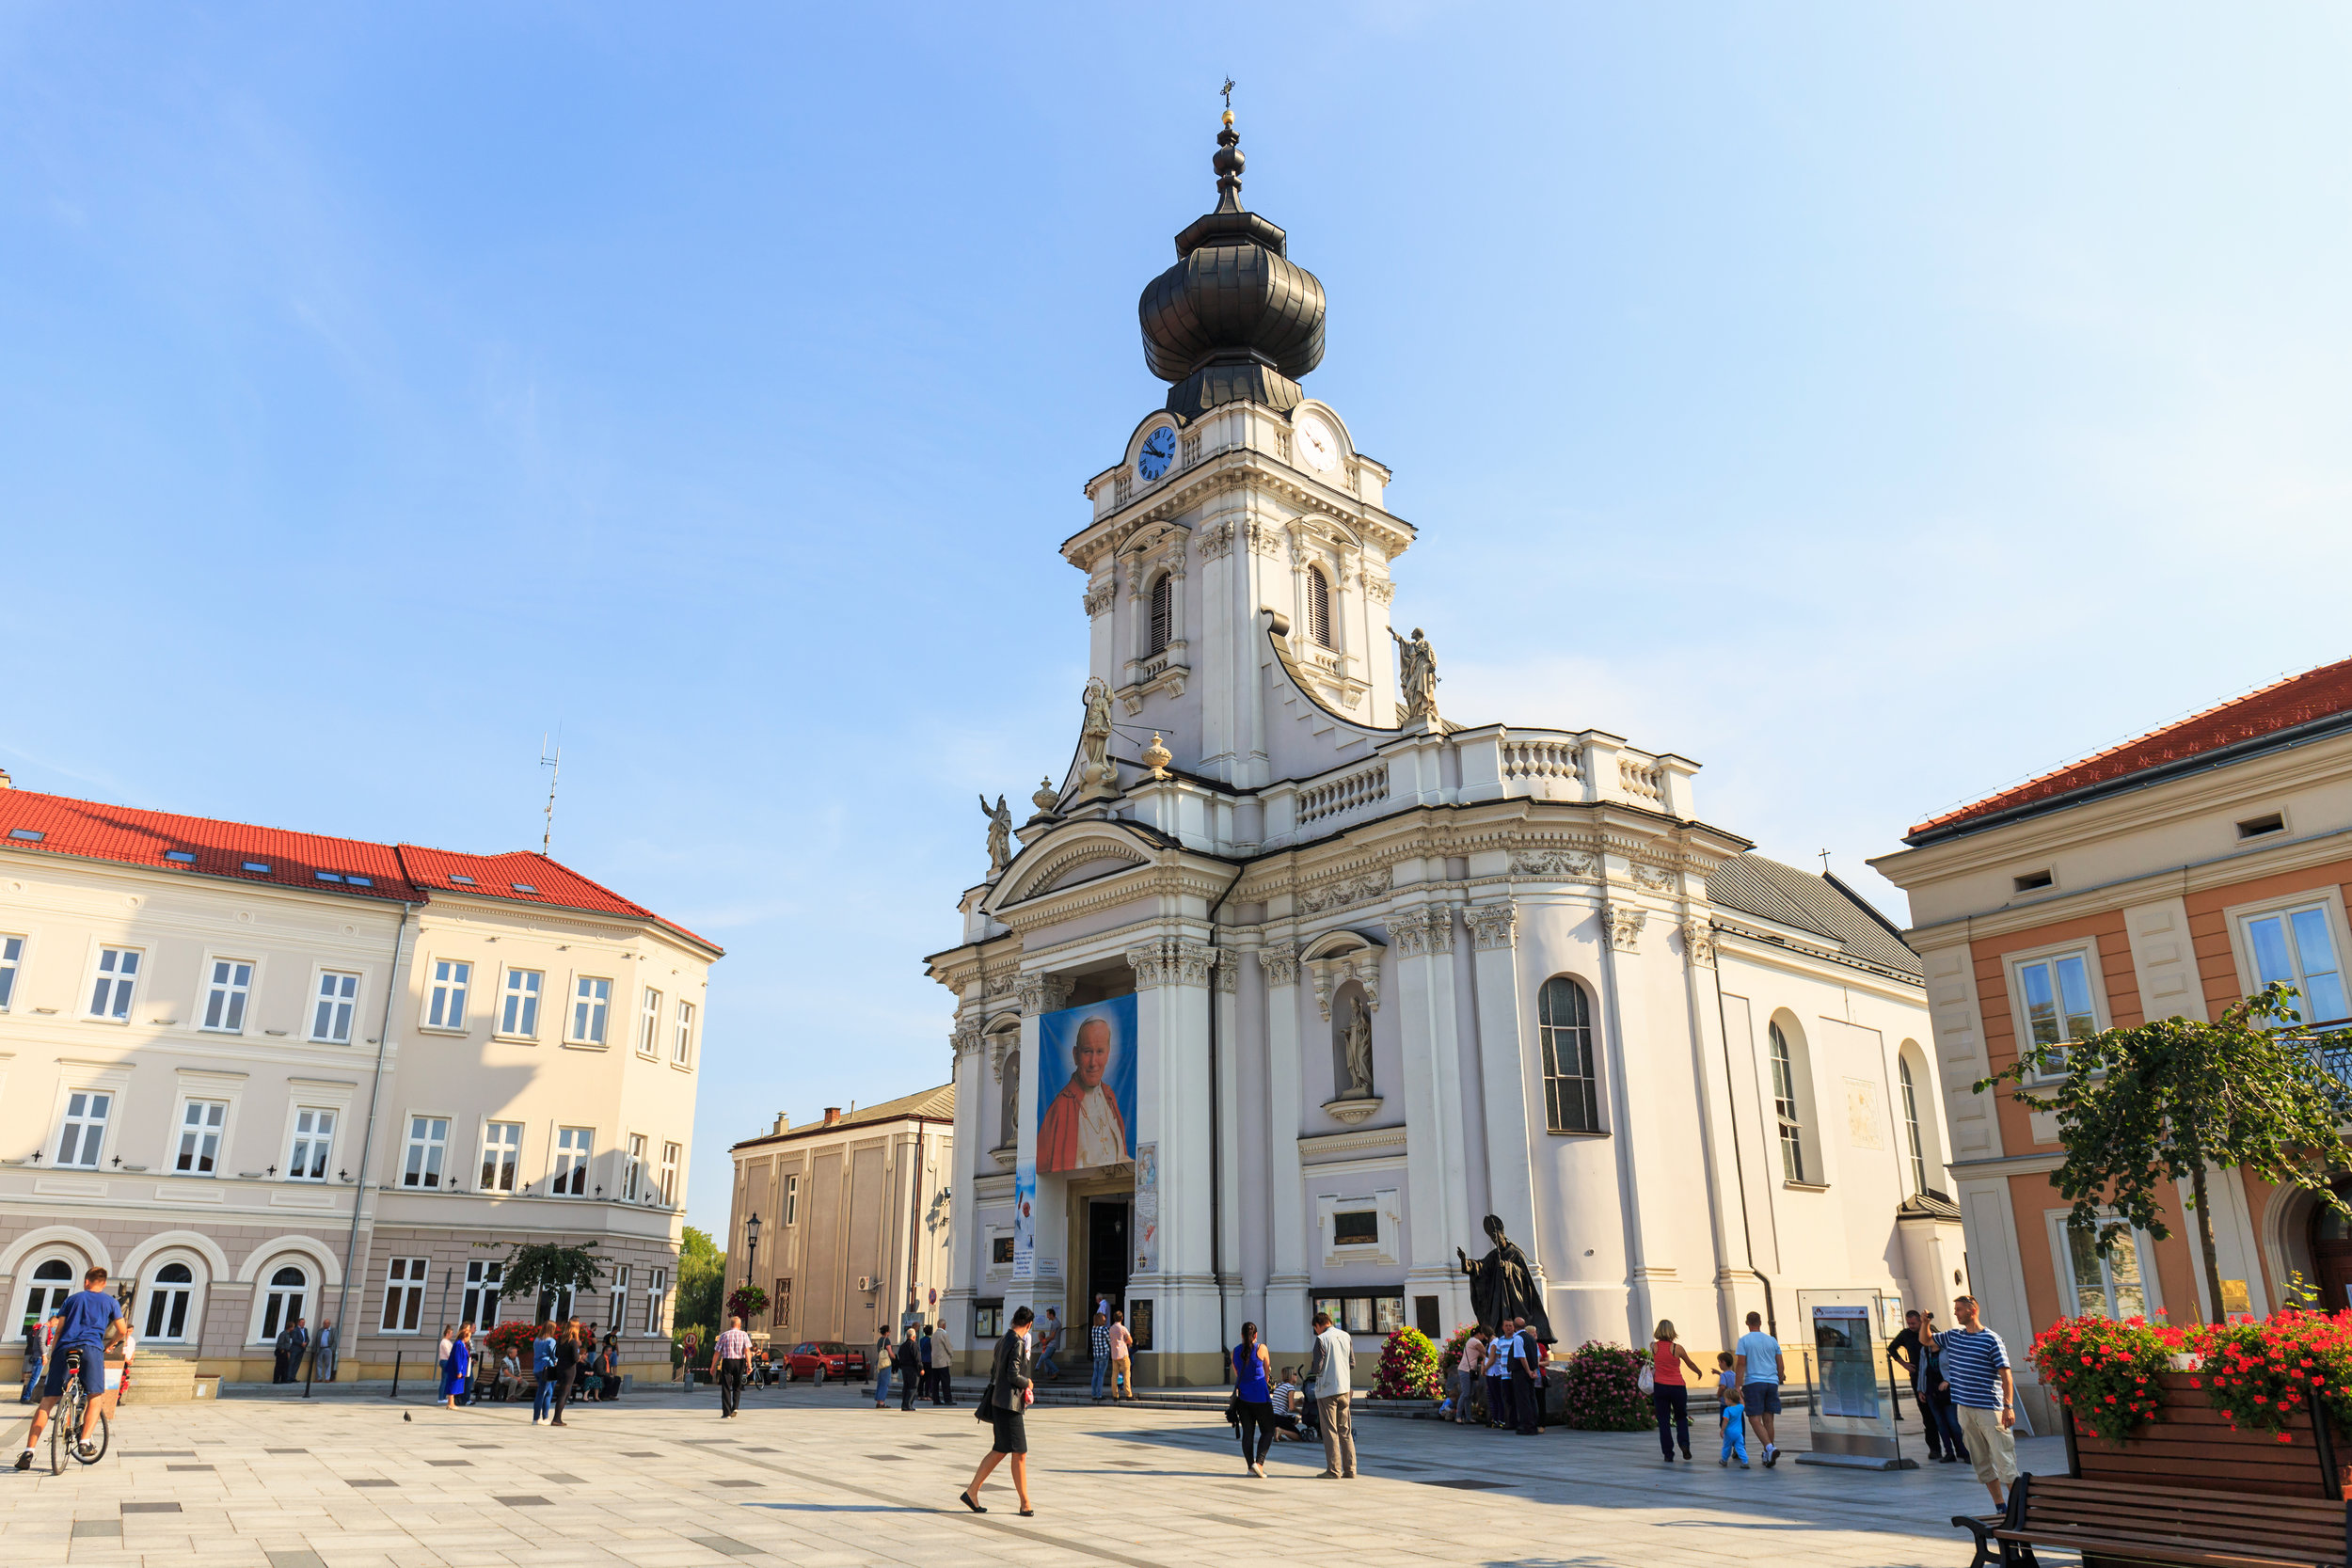 Poland, Wadowice - September 07, 2014- Tourists visit the city center of Wadowice. Wadowice is the place of birth of Pope John Paul II.jpg